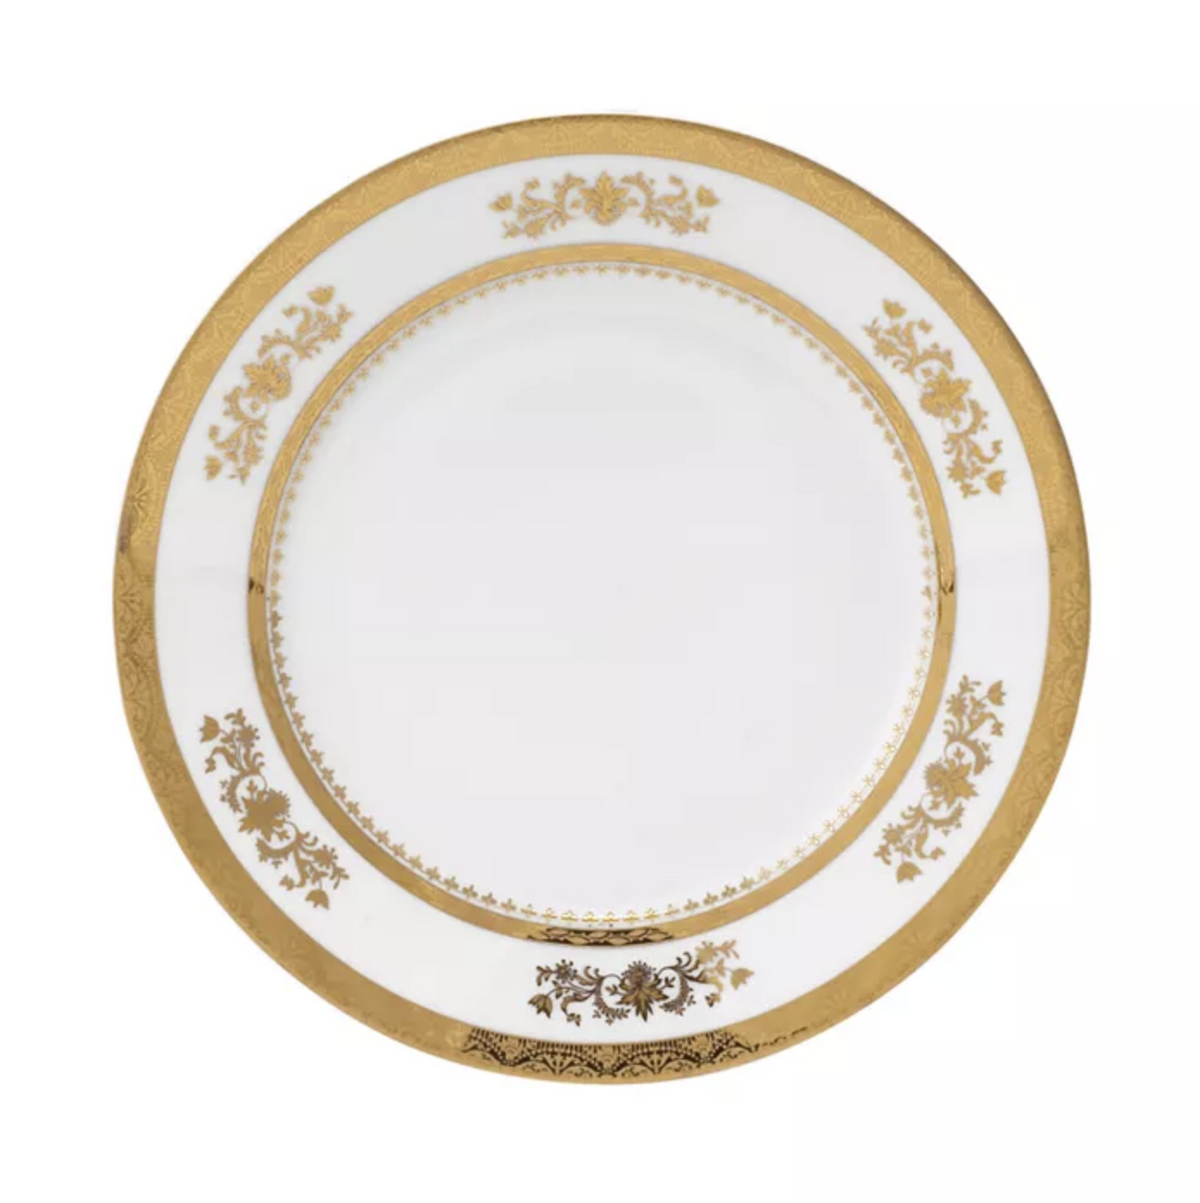 Orsay Salad Plate - White